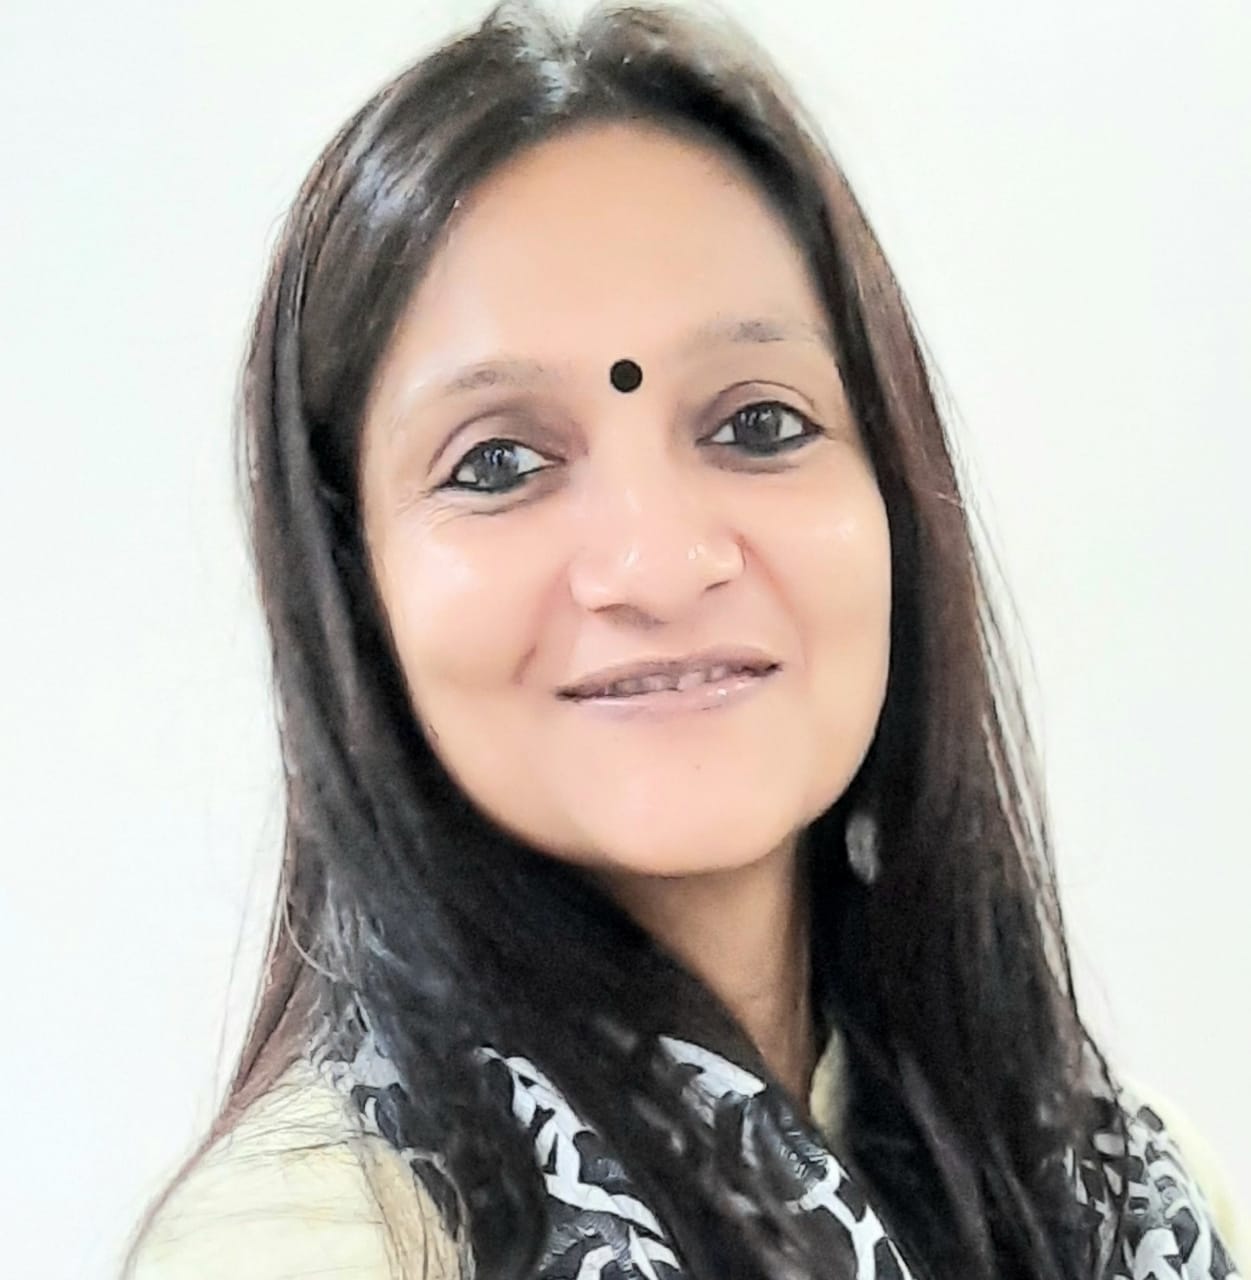 Article - Author name BHAWNA SINGHAL